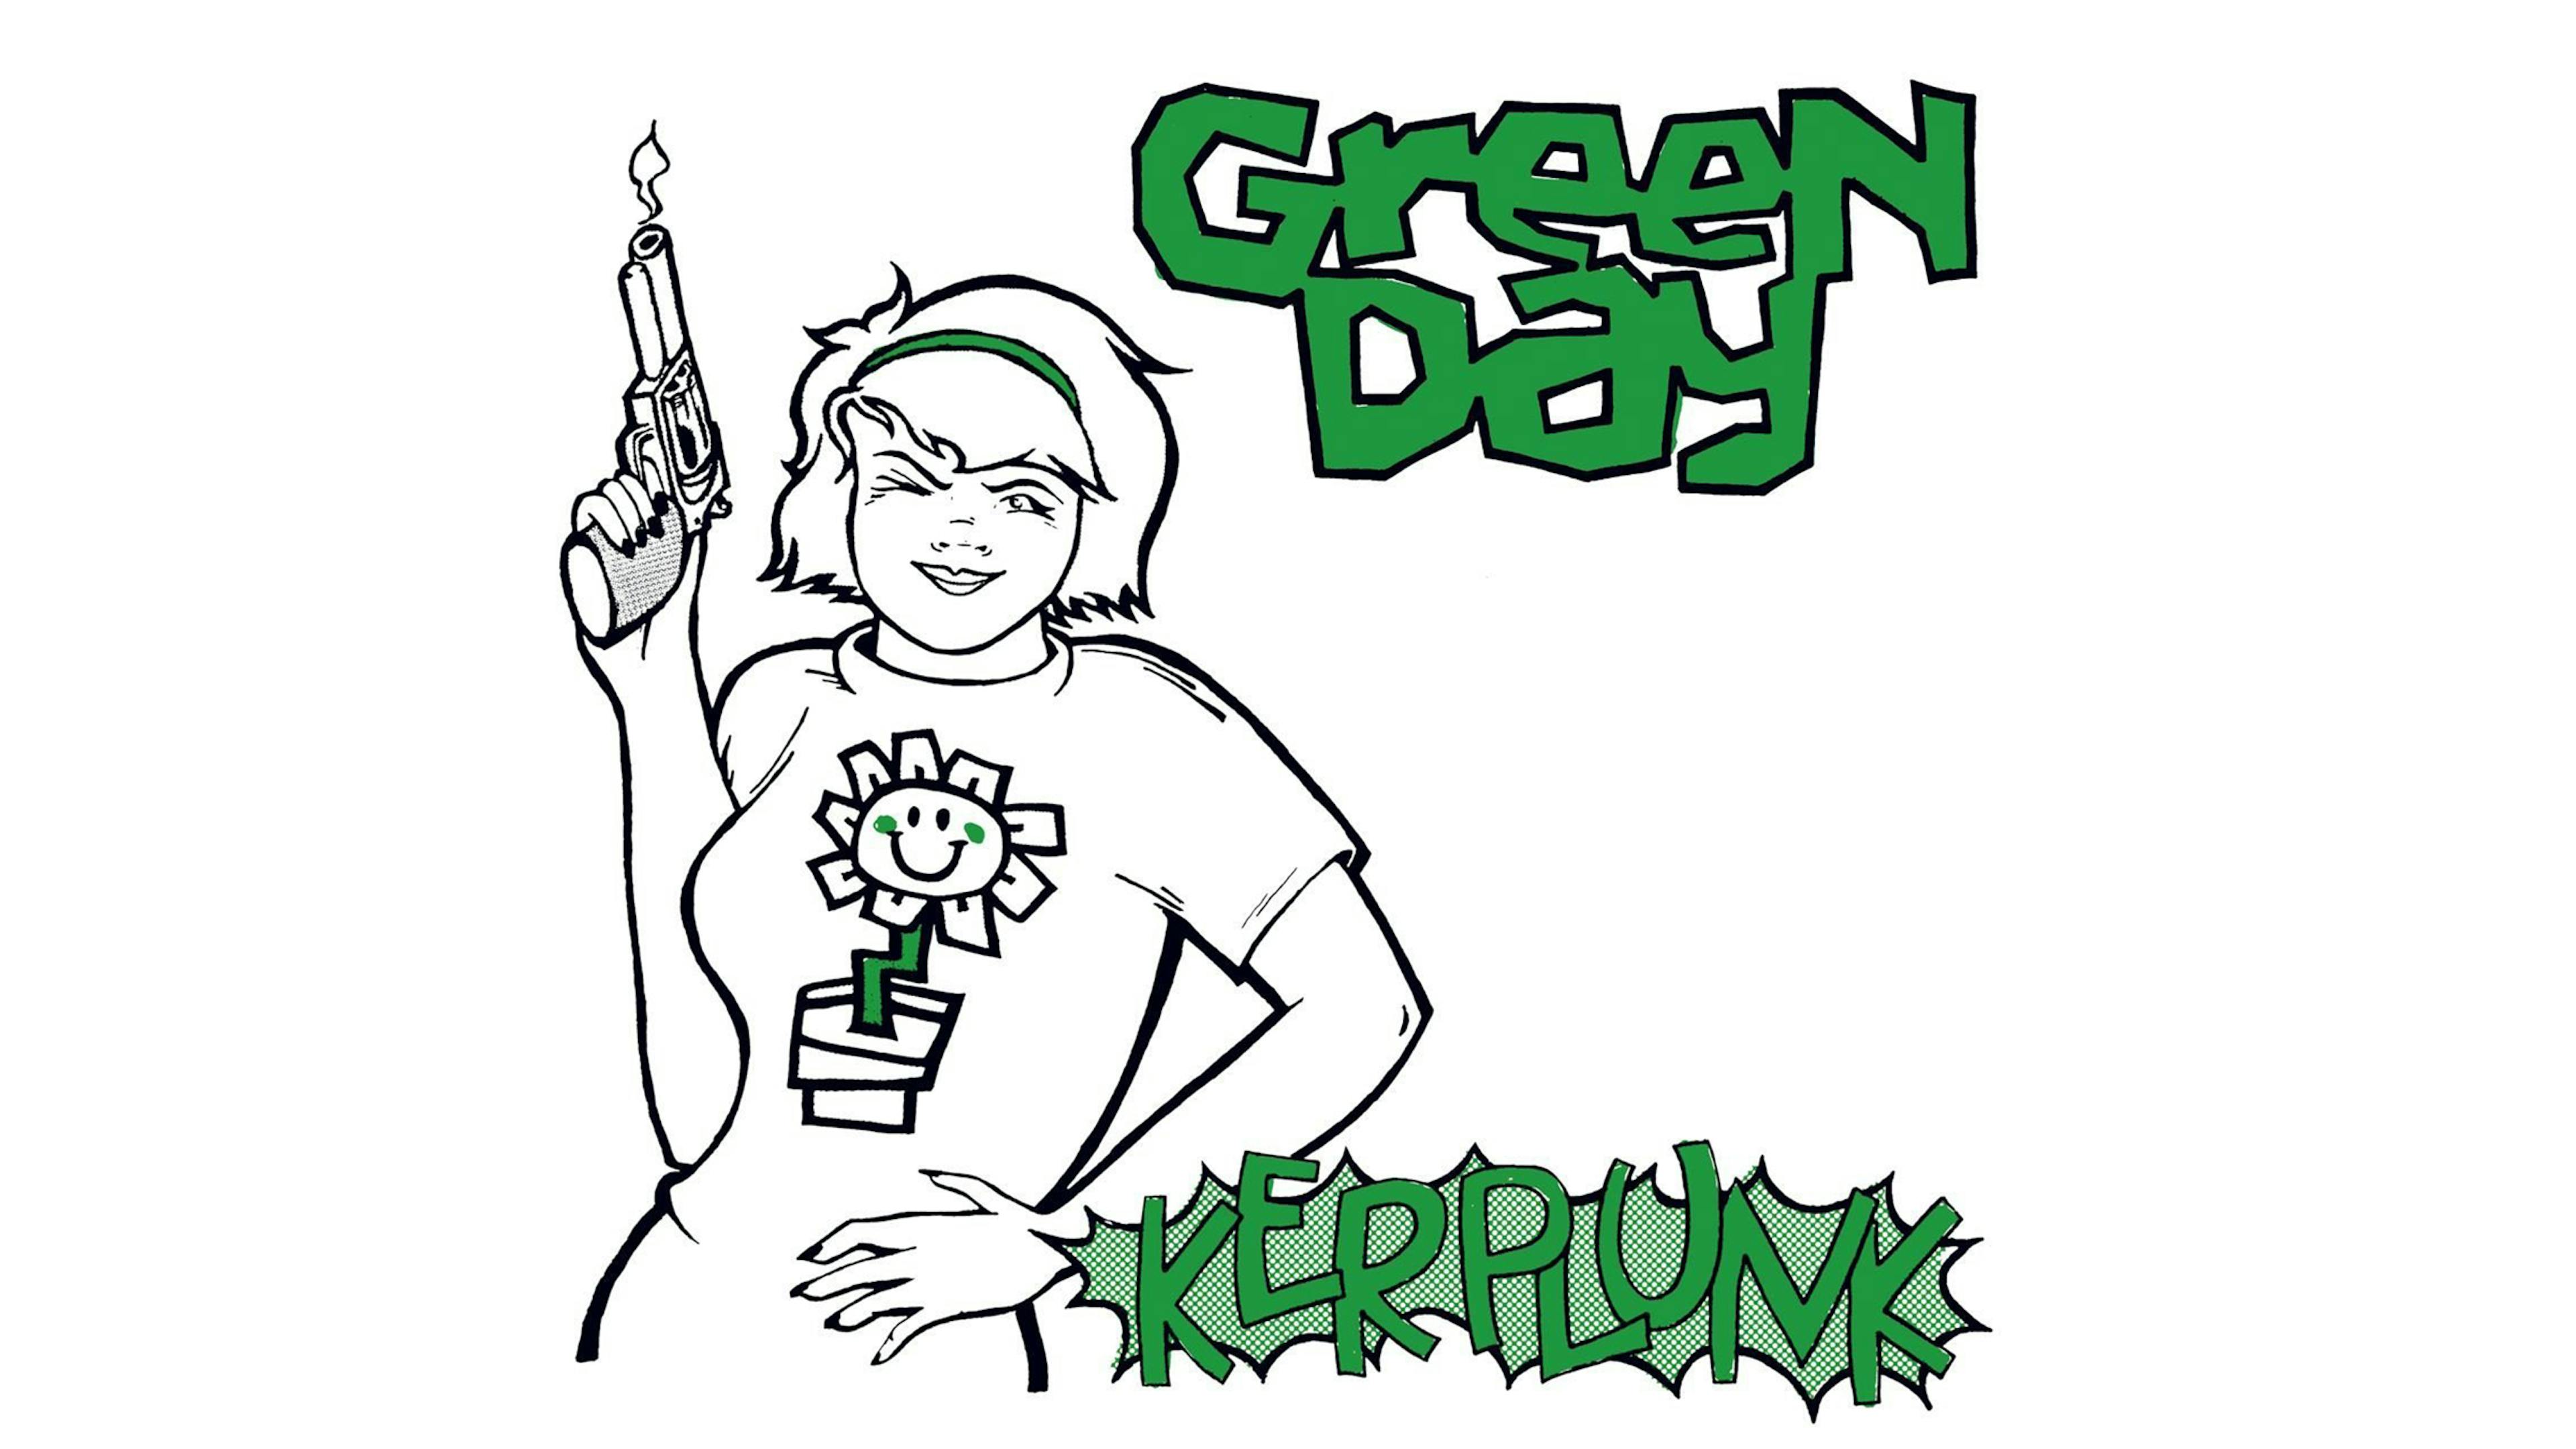 Green Day’s Kerplunk! Is An Unspoiled ’90s Punk Gem